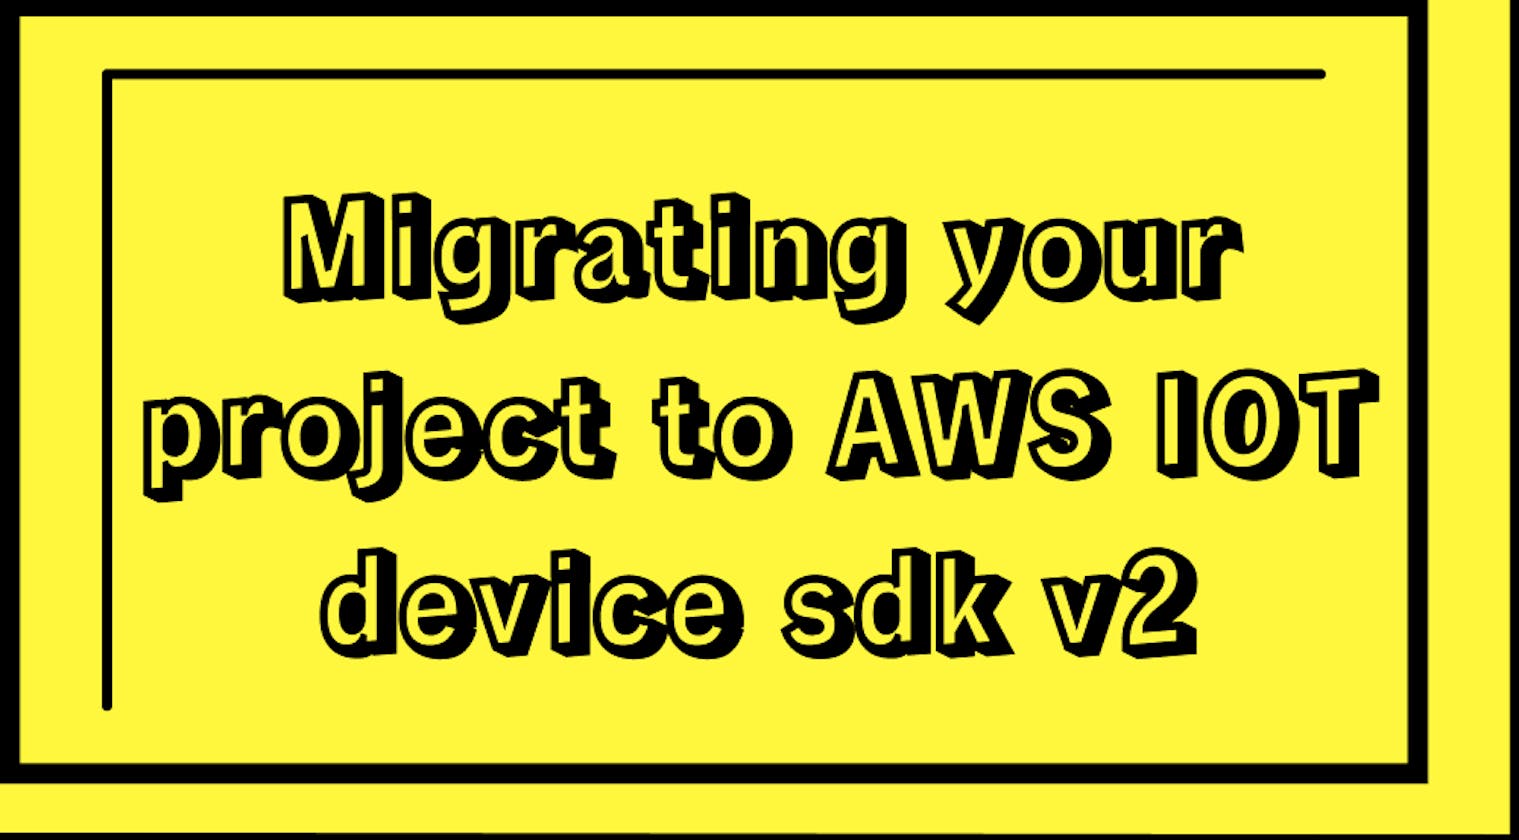 Migrating your project to AWS IOT device sdk v2